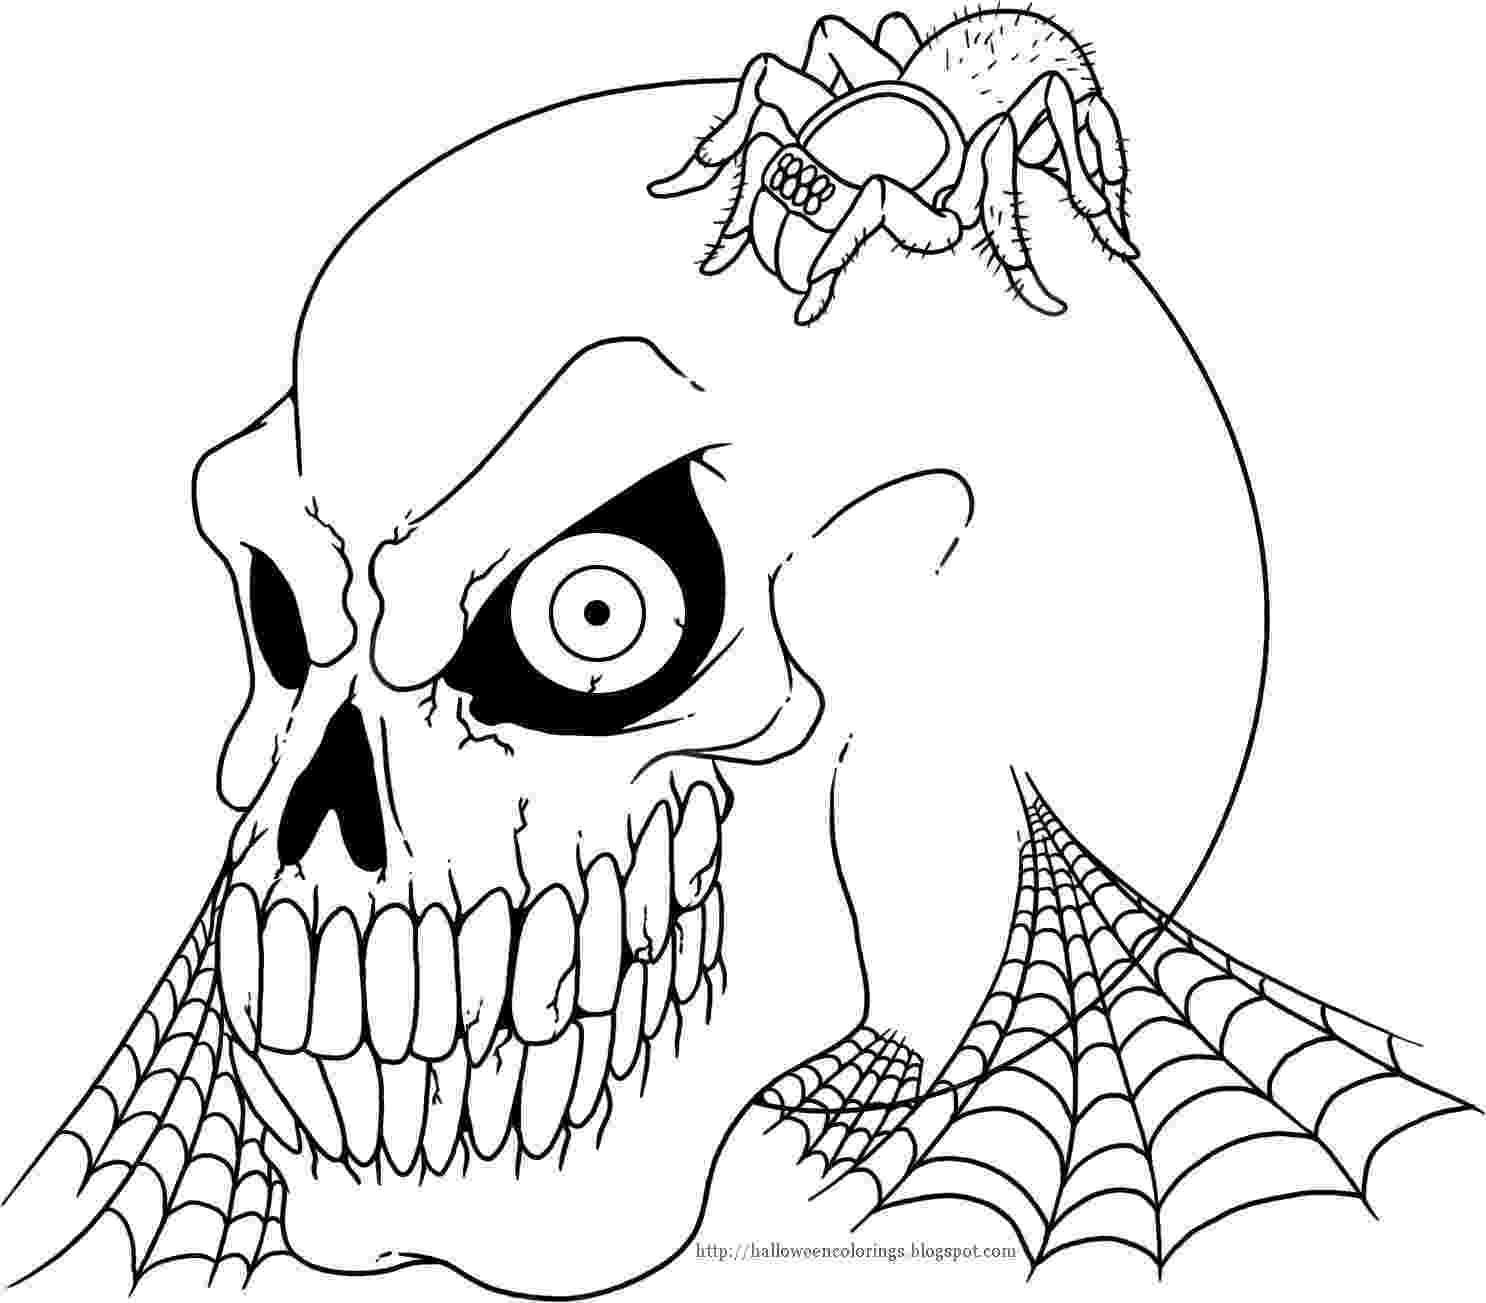 halloween coloring pages to color online 24 free printable halloween coloring pages for kids pages color halloween online coloring to 